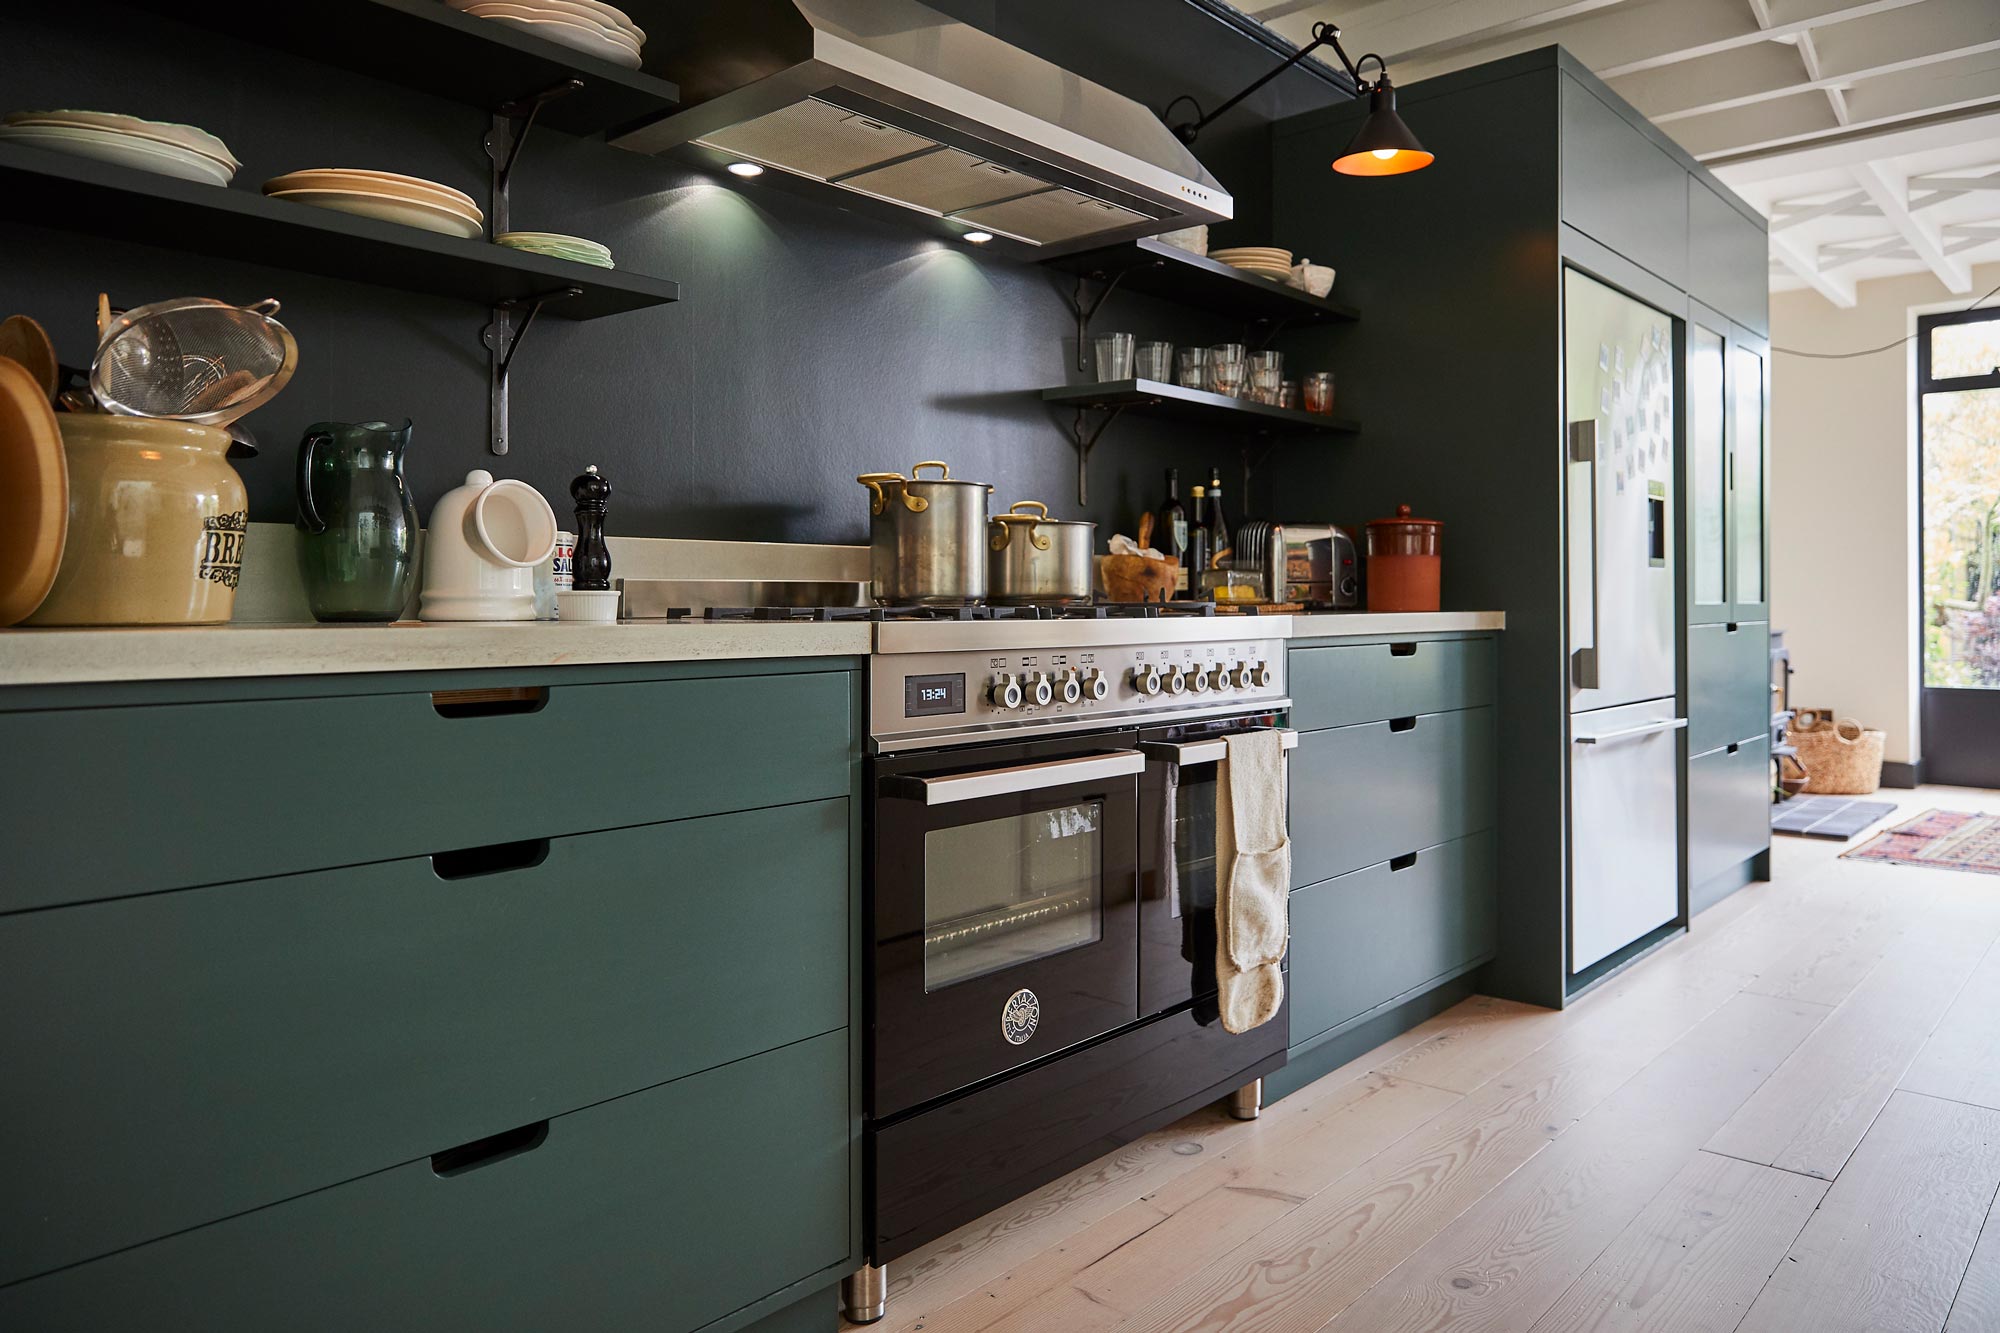 Range cooker next to painted birch plywood kitchen unit and concrete worktop